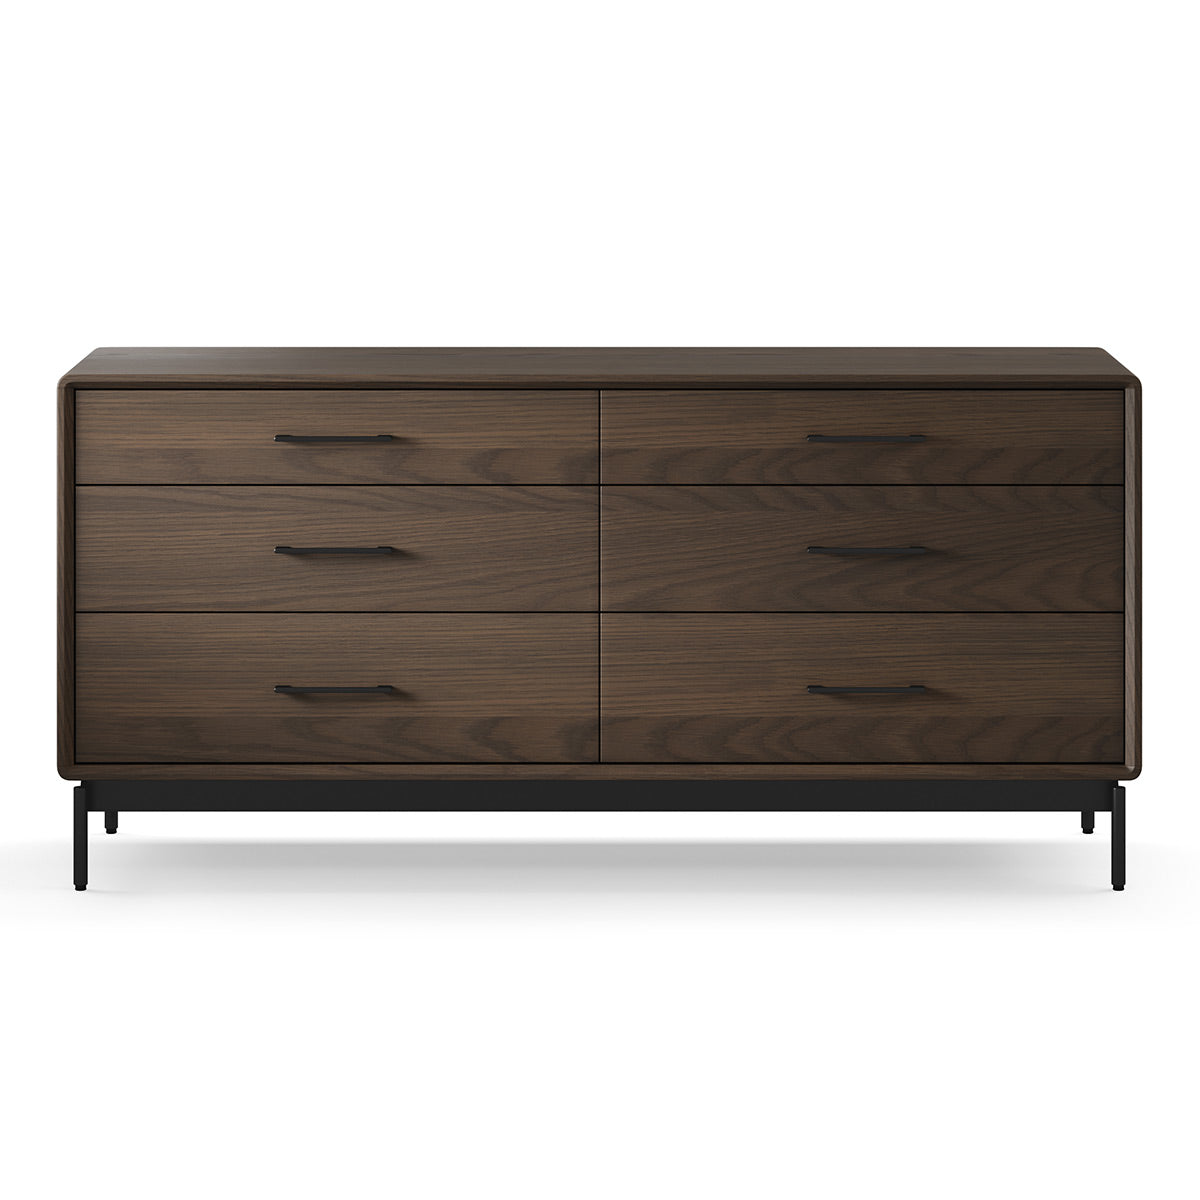 BDI LINQ 9186 Dresser with 6 Self-Closing Drawers and Metal Base (Toasted Oak)